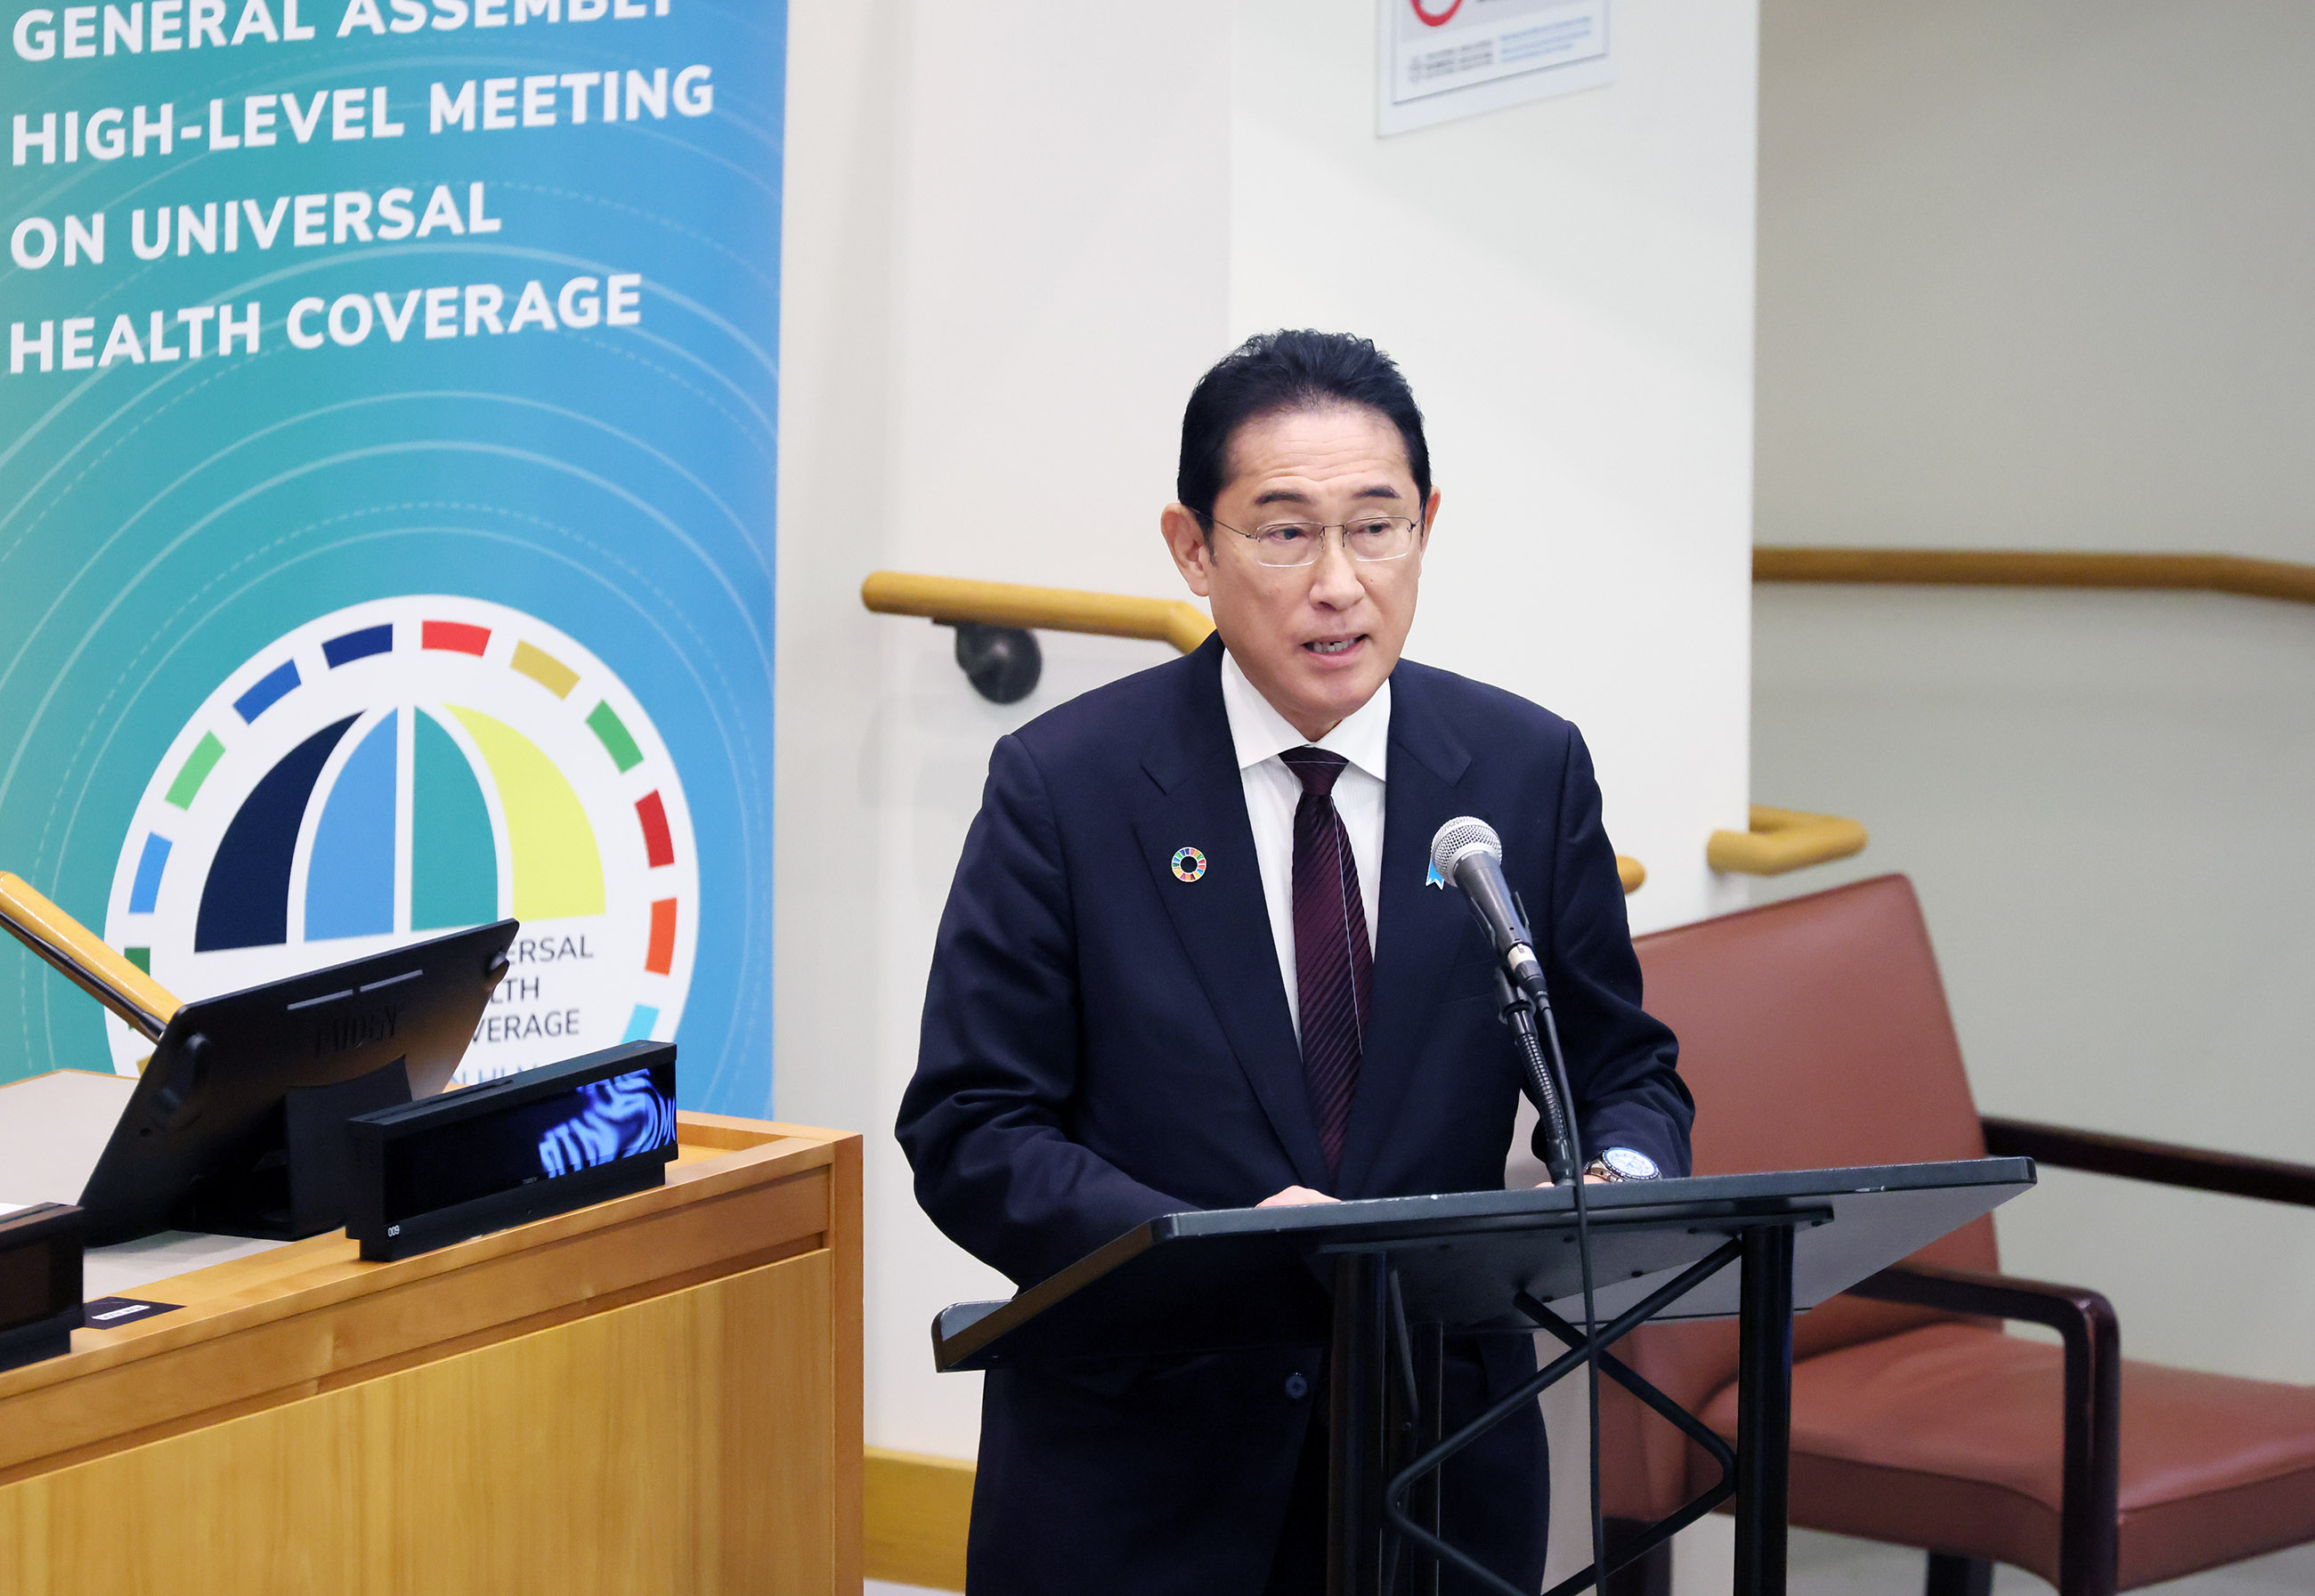 Prime Minister Kishida attending the UN General Assembly High-Level Meeting on UHC (2)